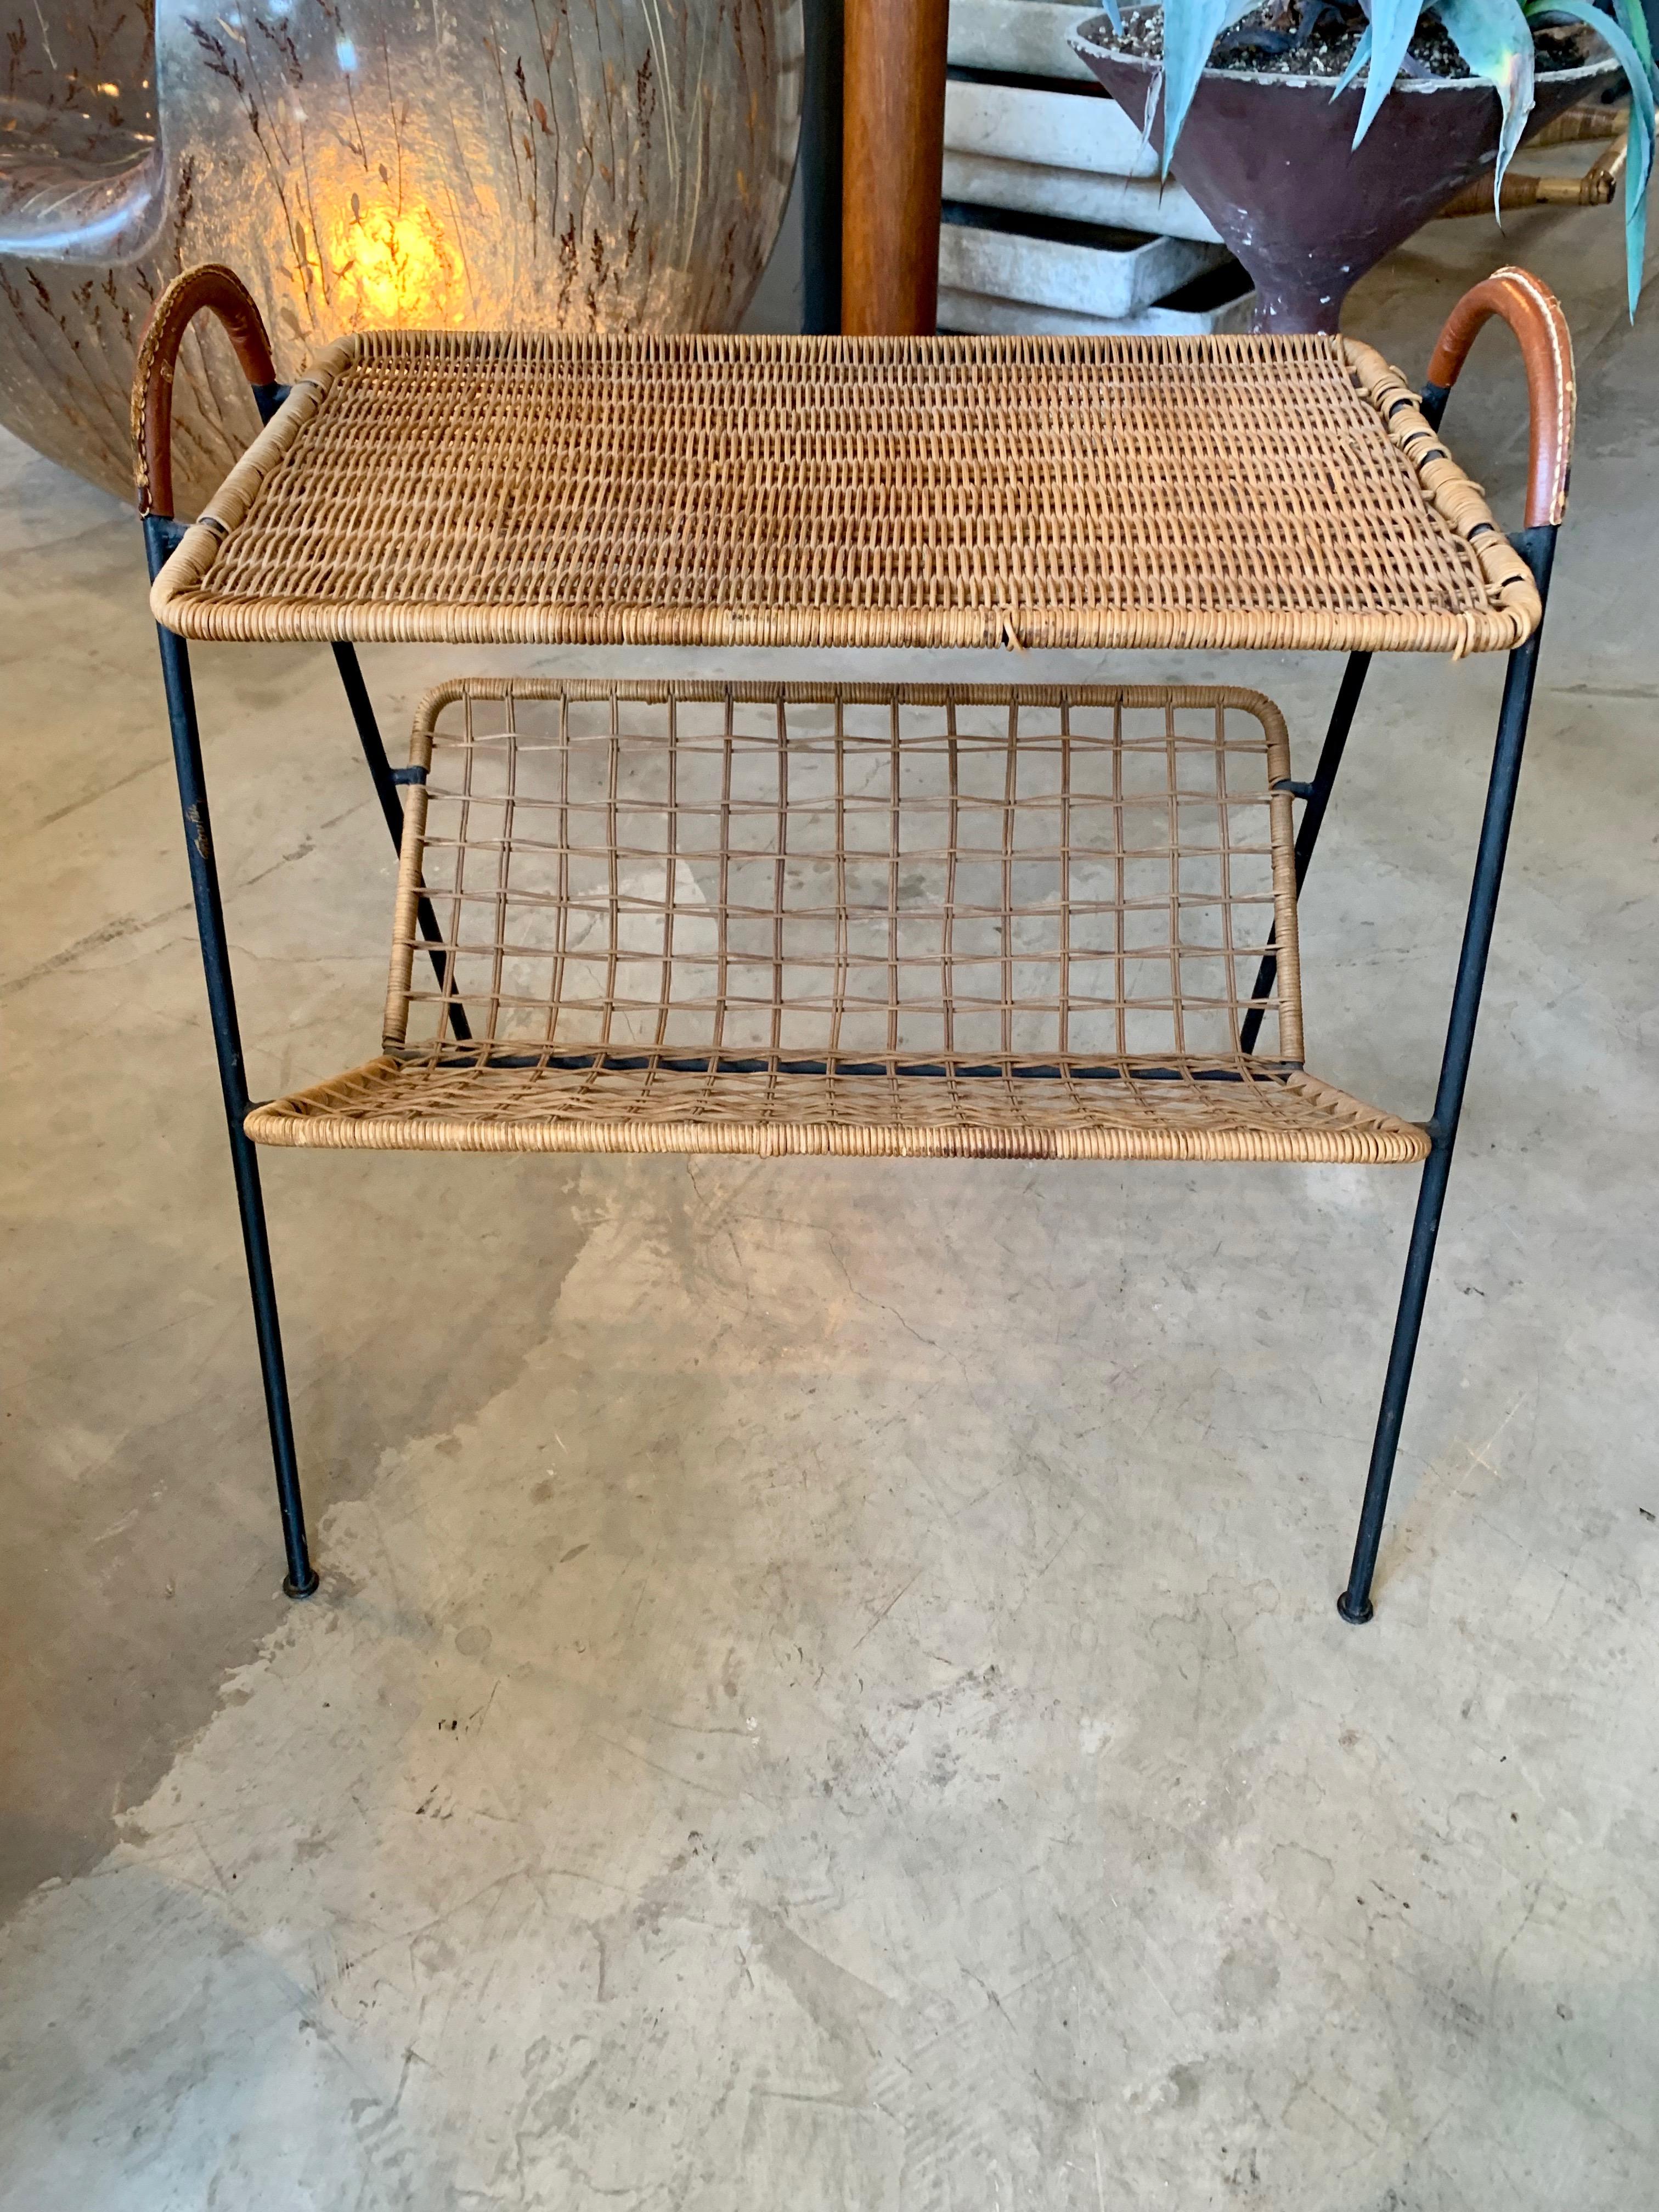 Stunning side table by Jacques Adnet. Iron frame with saddle leather wrapped handles and signature Adnet contrast stitching. Handwoven wicker tabletop with woven wicker slanted shelf underneath. Exceptional piece of collectible Adnet. Good original